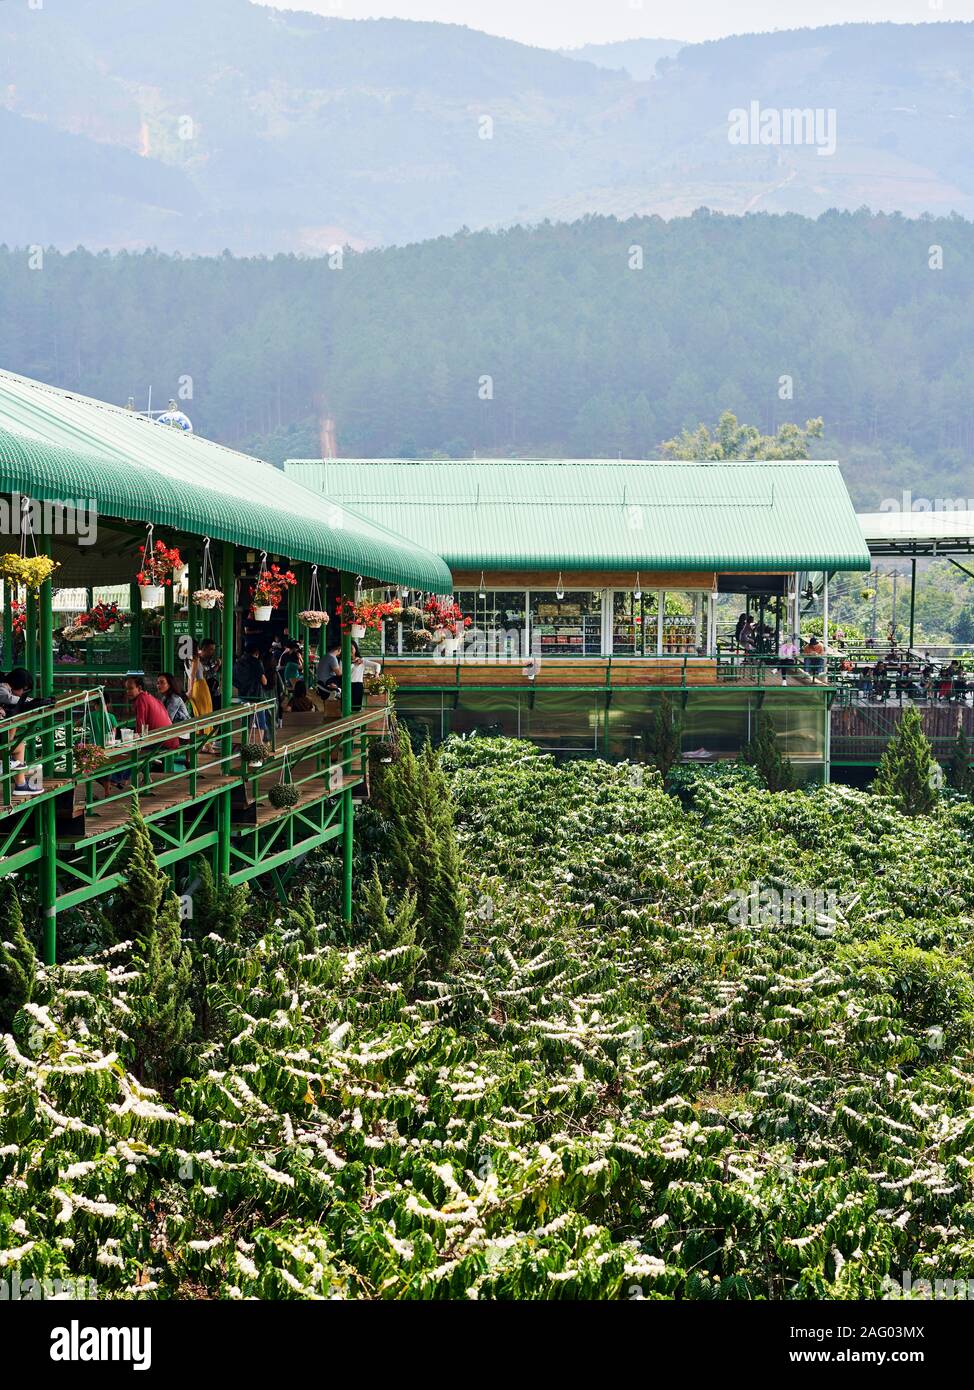 The facade of a cafe looking over a coffee planation in the mountains of Da Lat Stock Photo